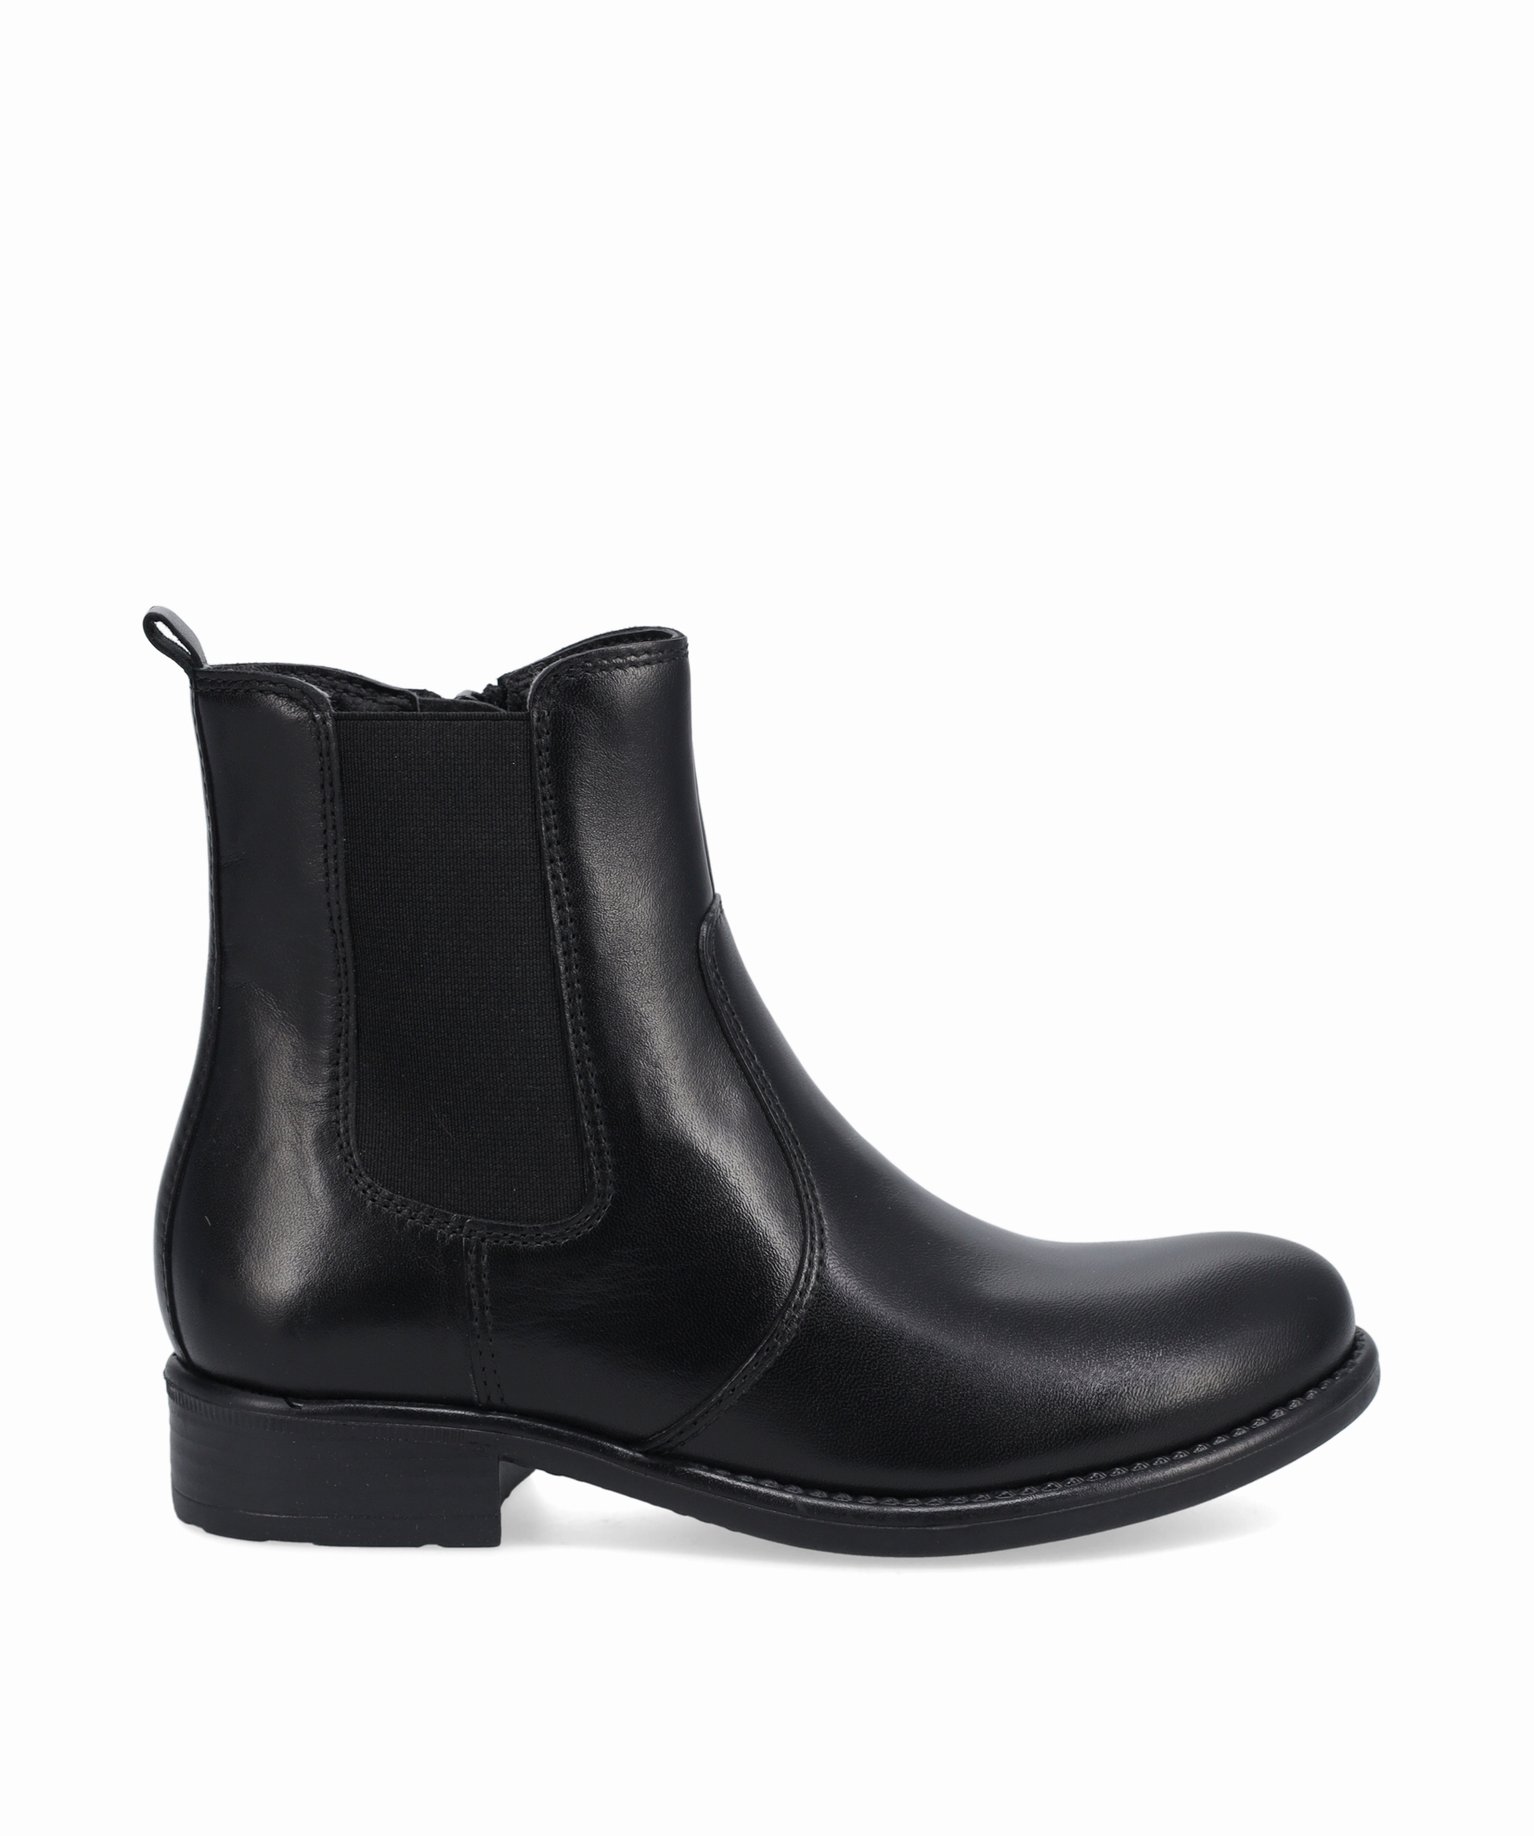 boots fille style chelsea unies dessus cuir - taneo noir